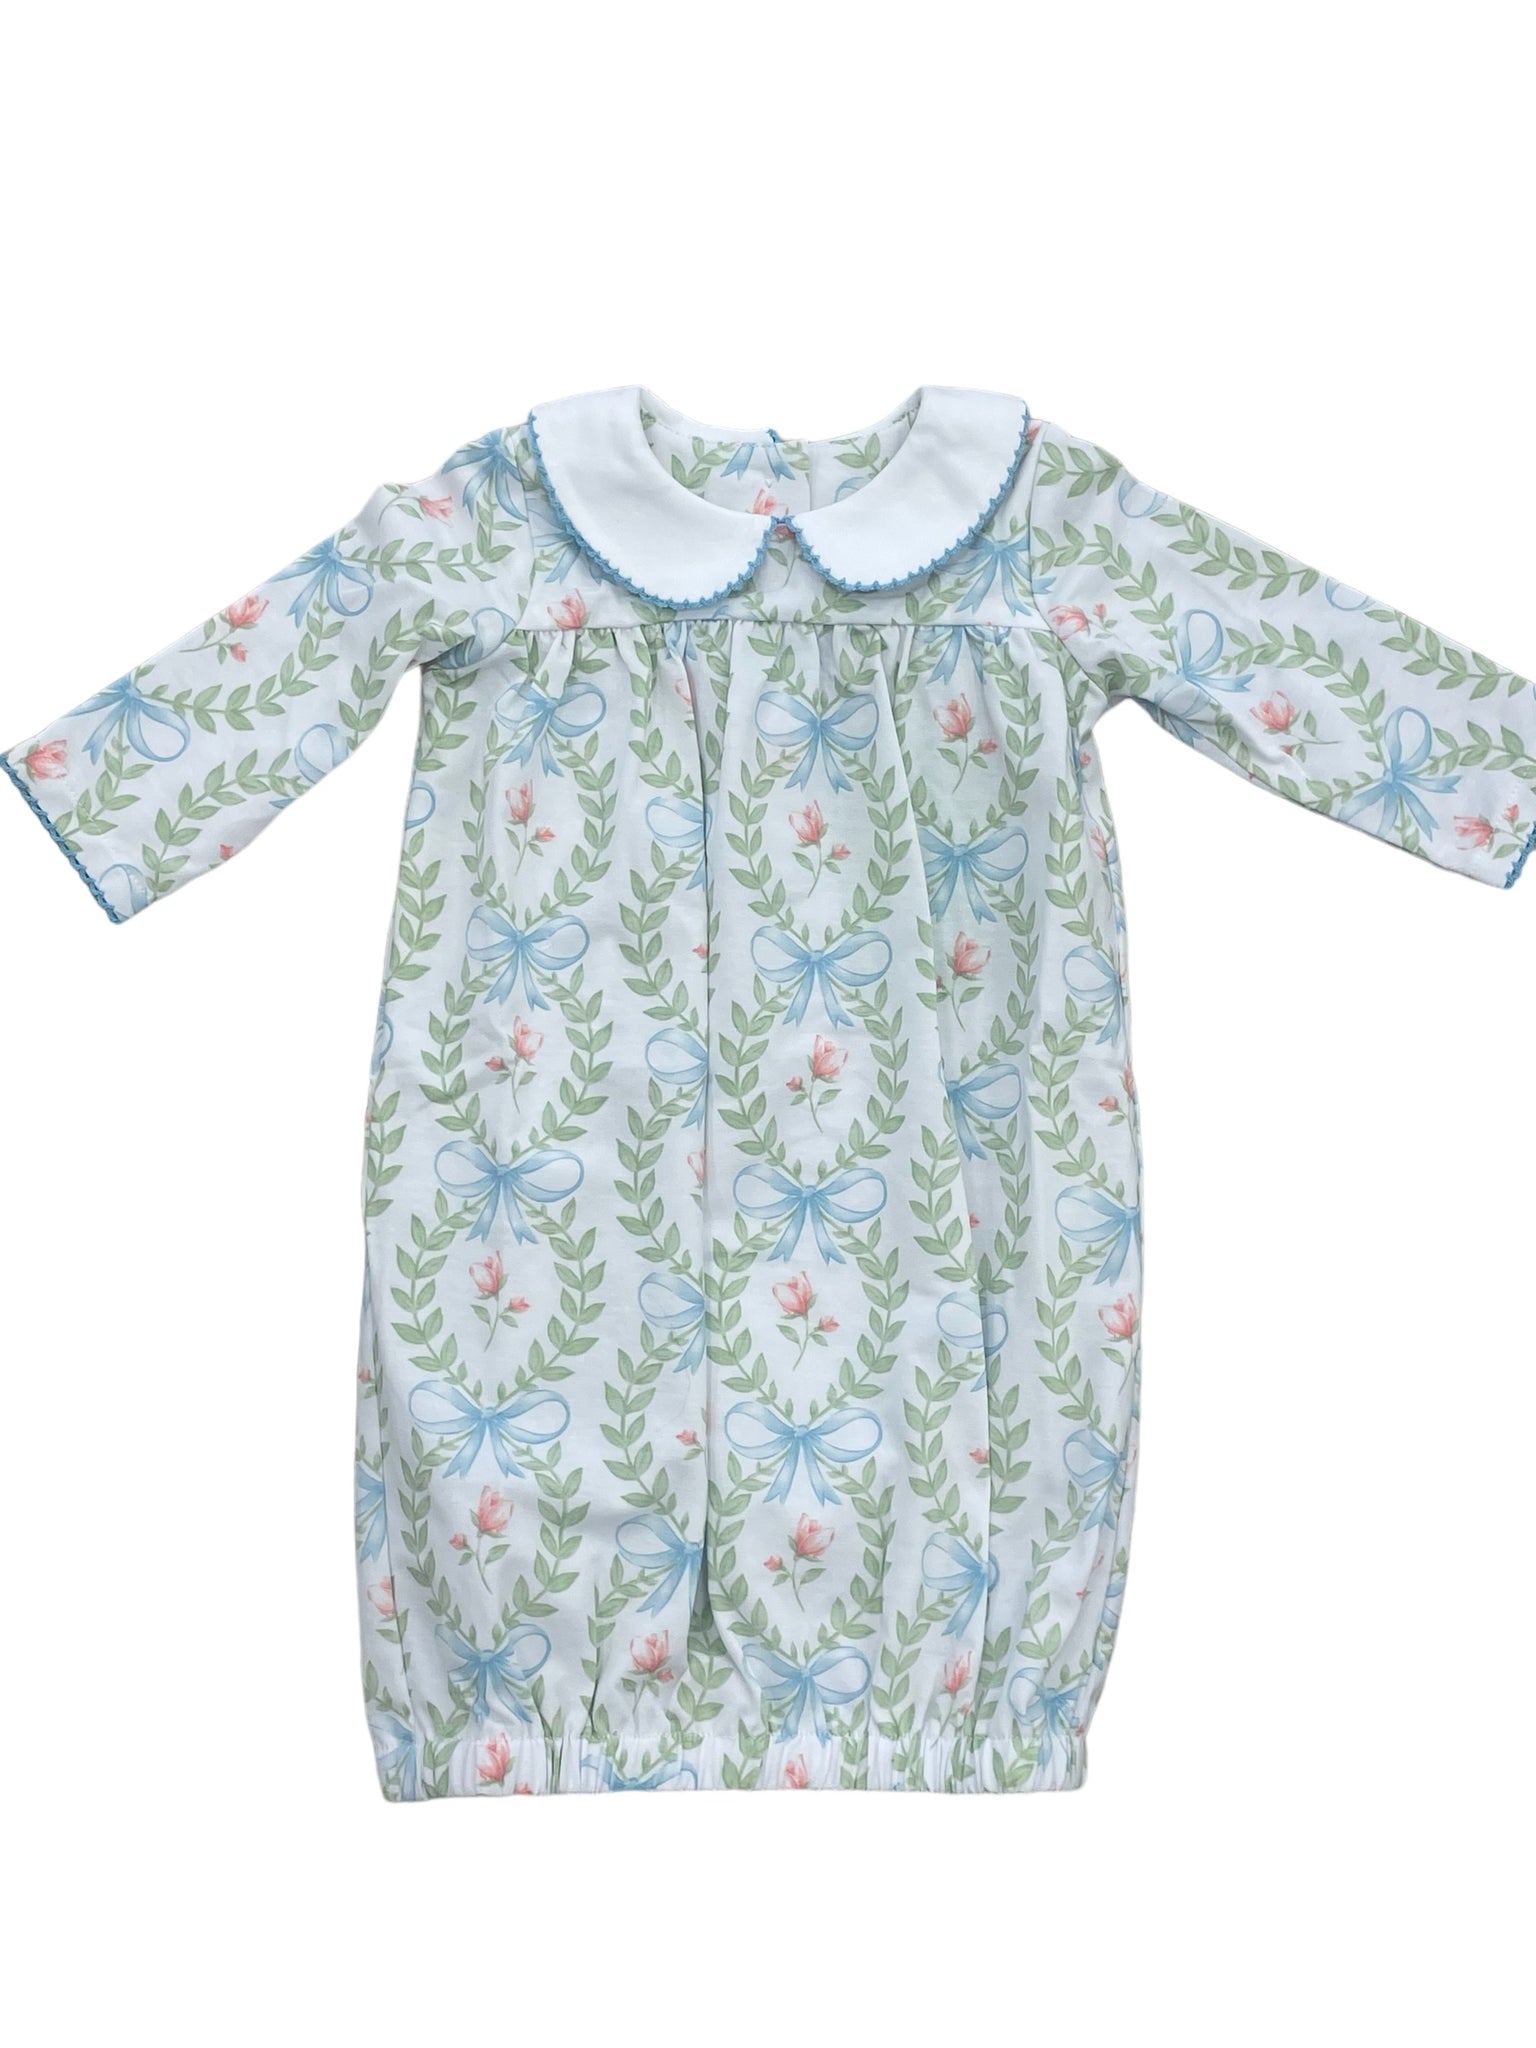 Baby Blue Bows- Baby Dress